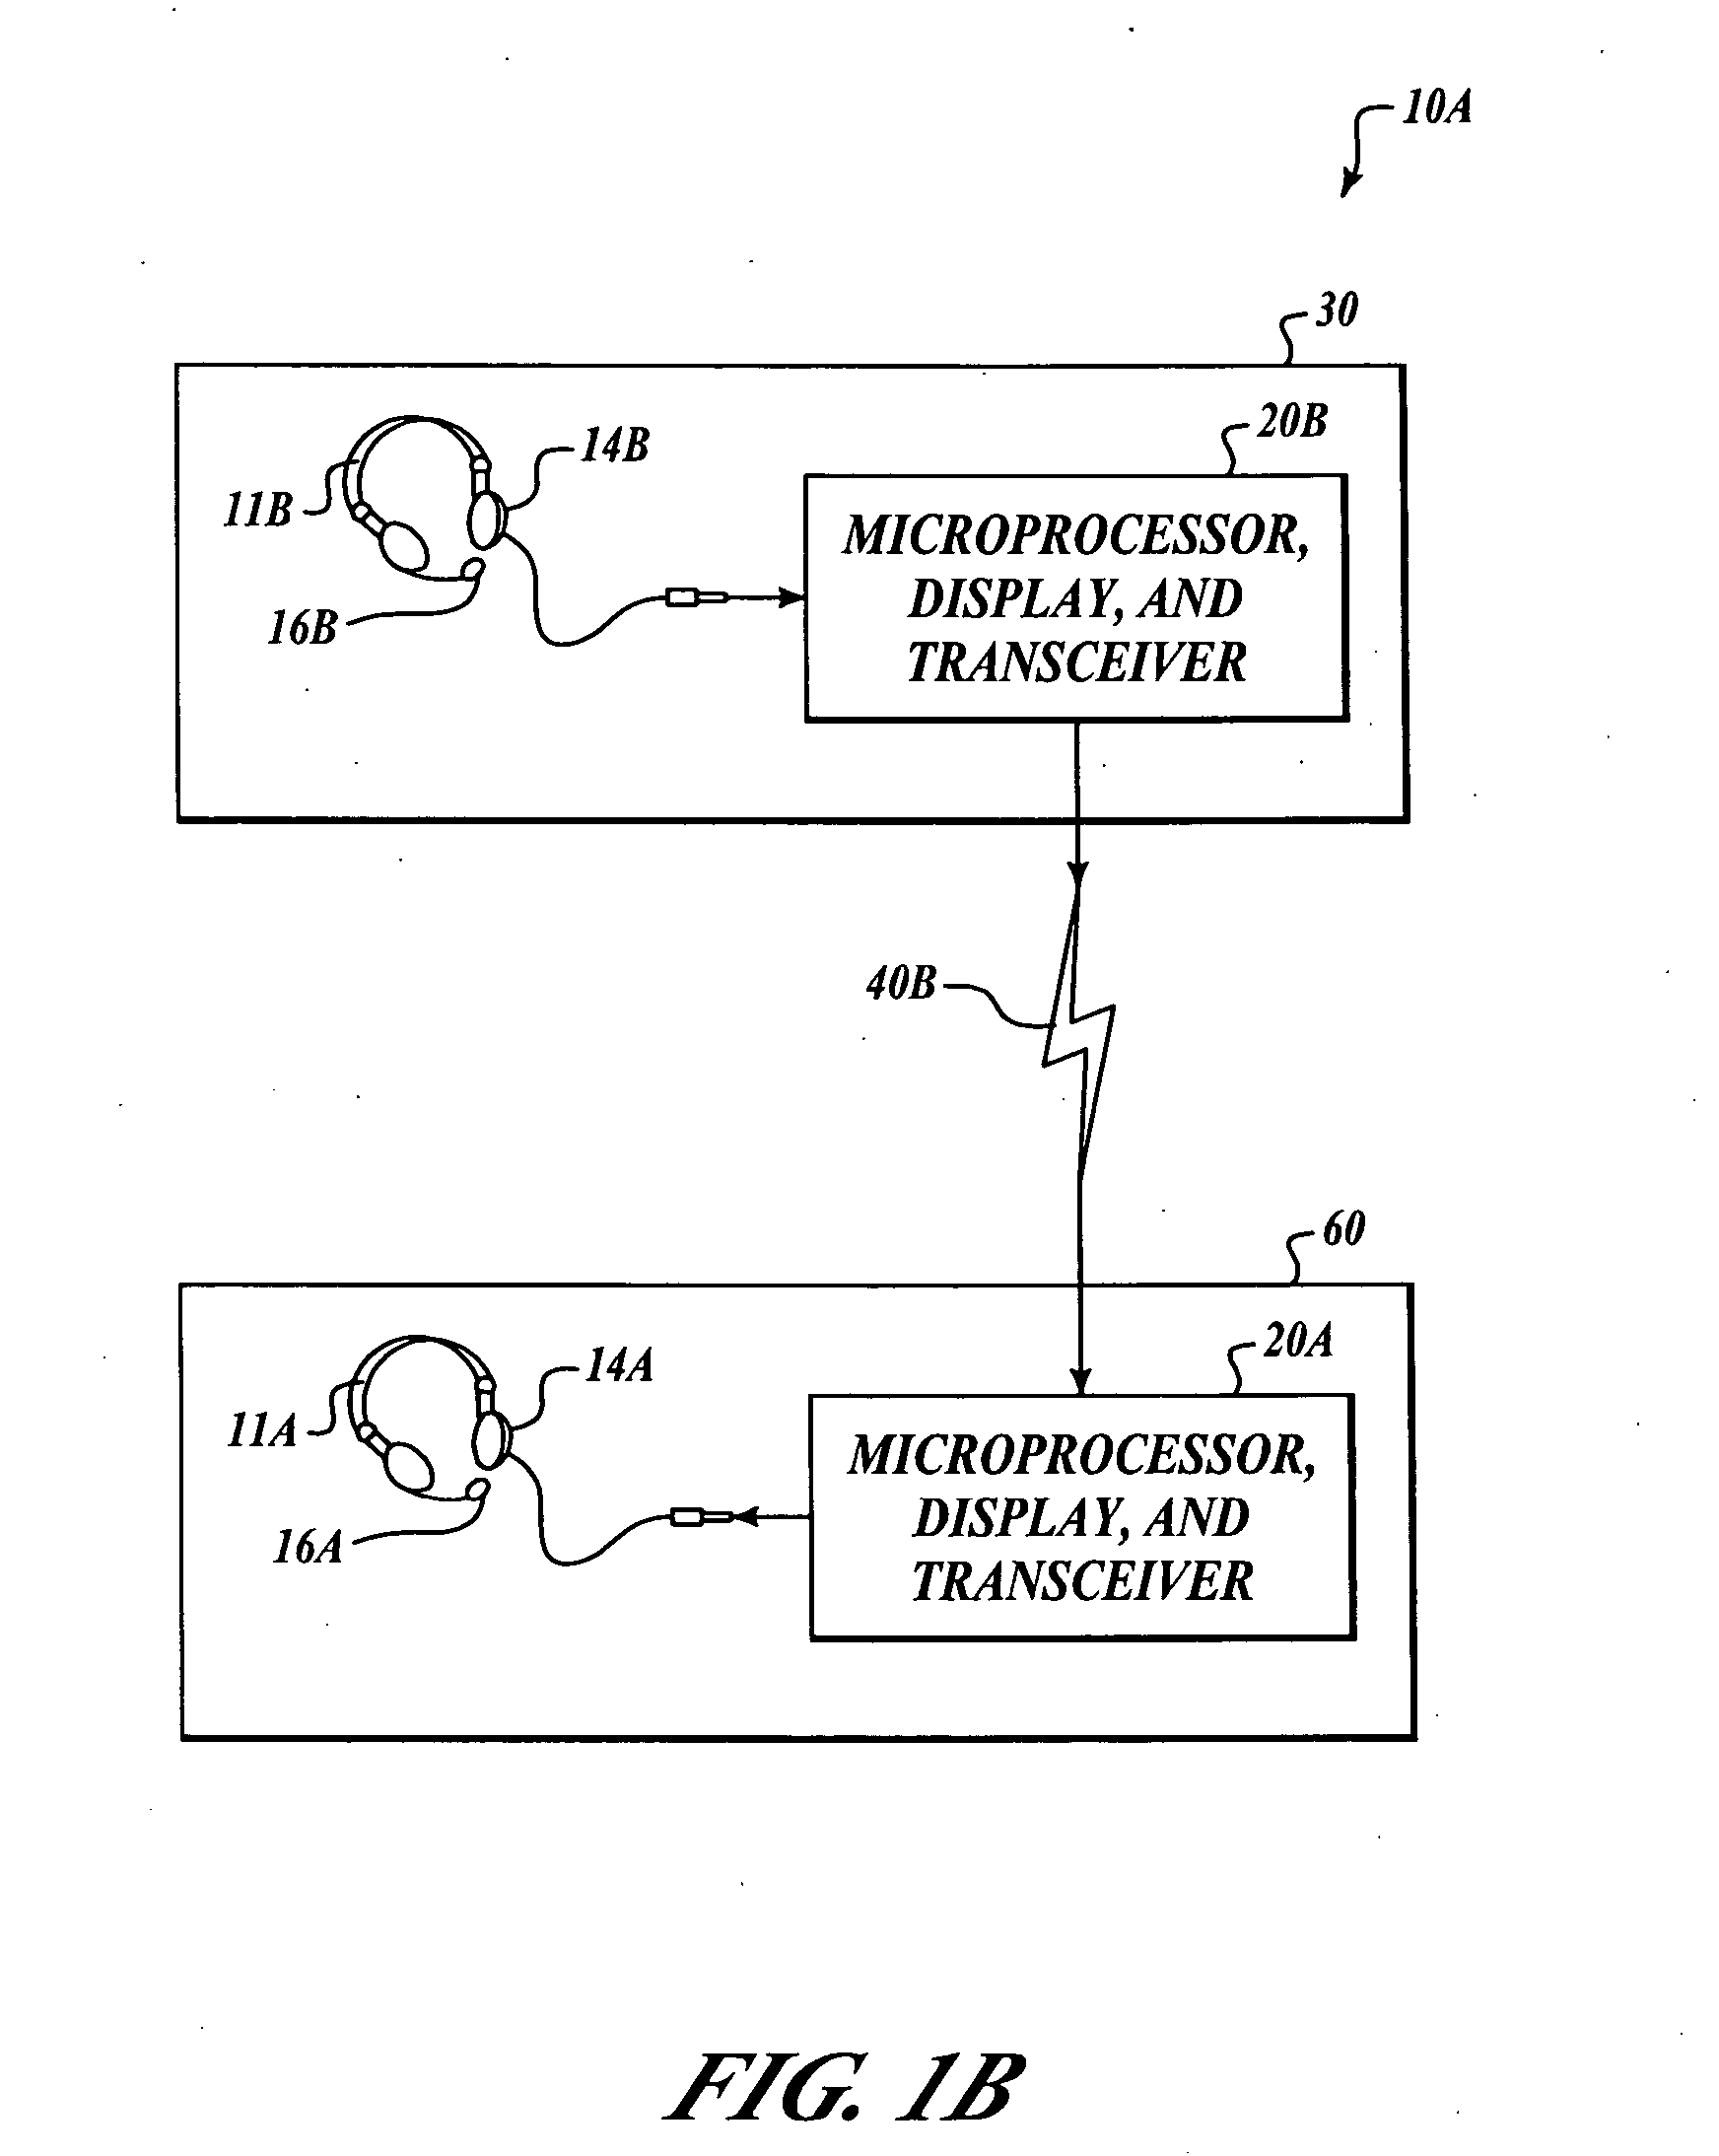 Enhanced system and method for air traffic control